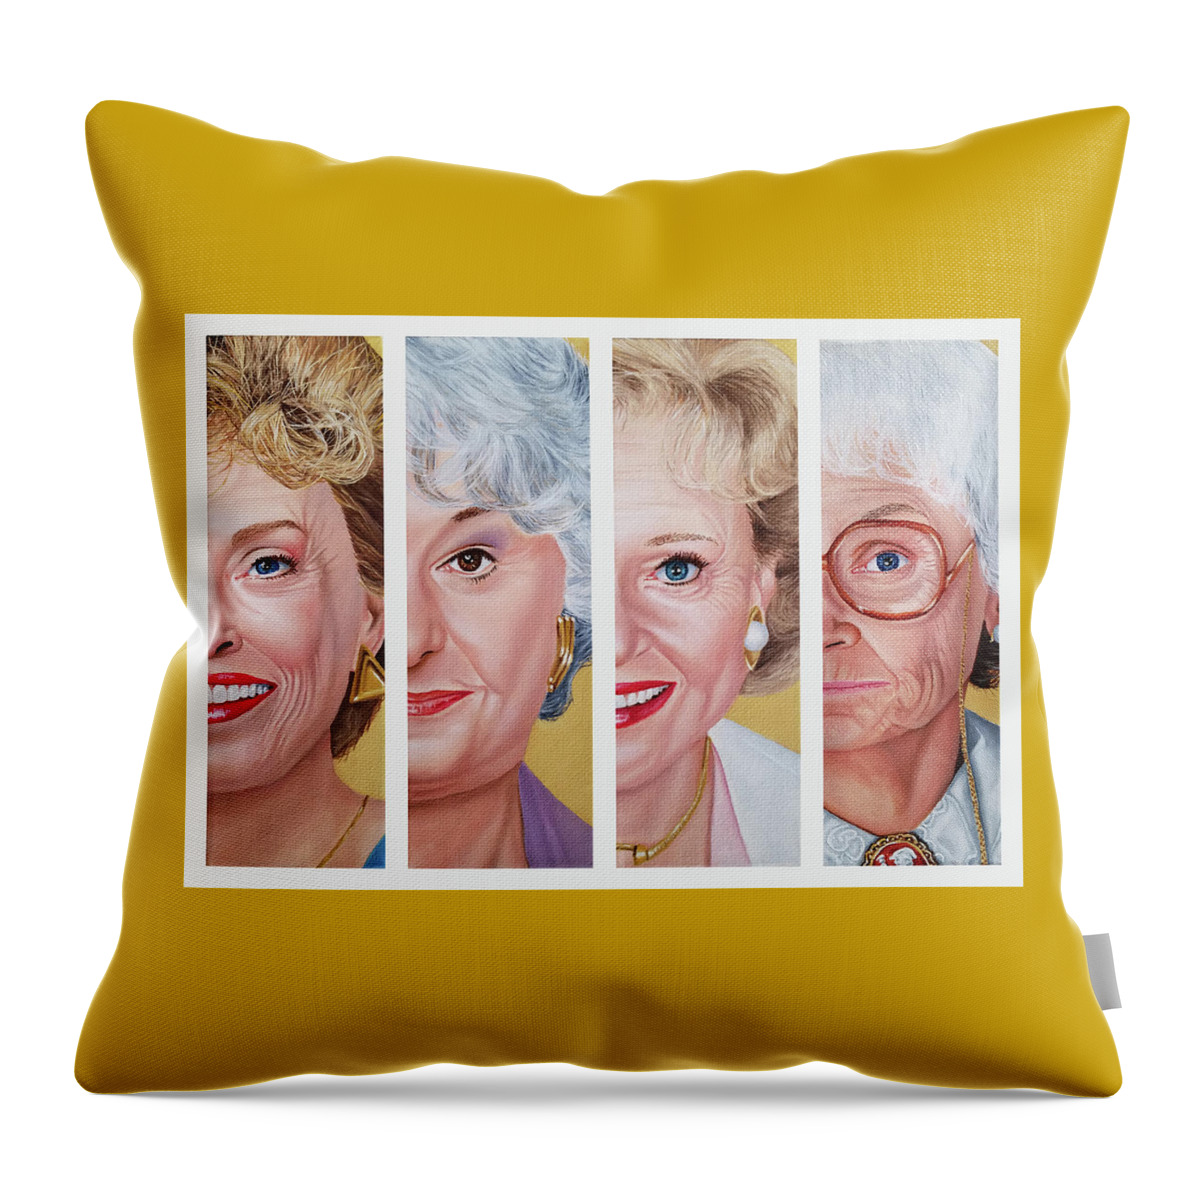 The Golden Girls Throw Pillow featuring the painting The Golden Girls by Vic Ritchey